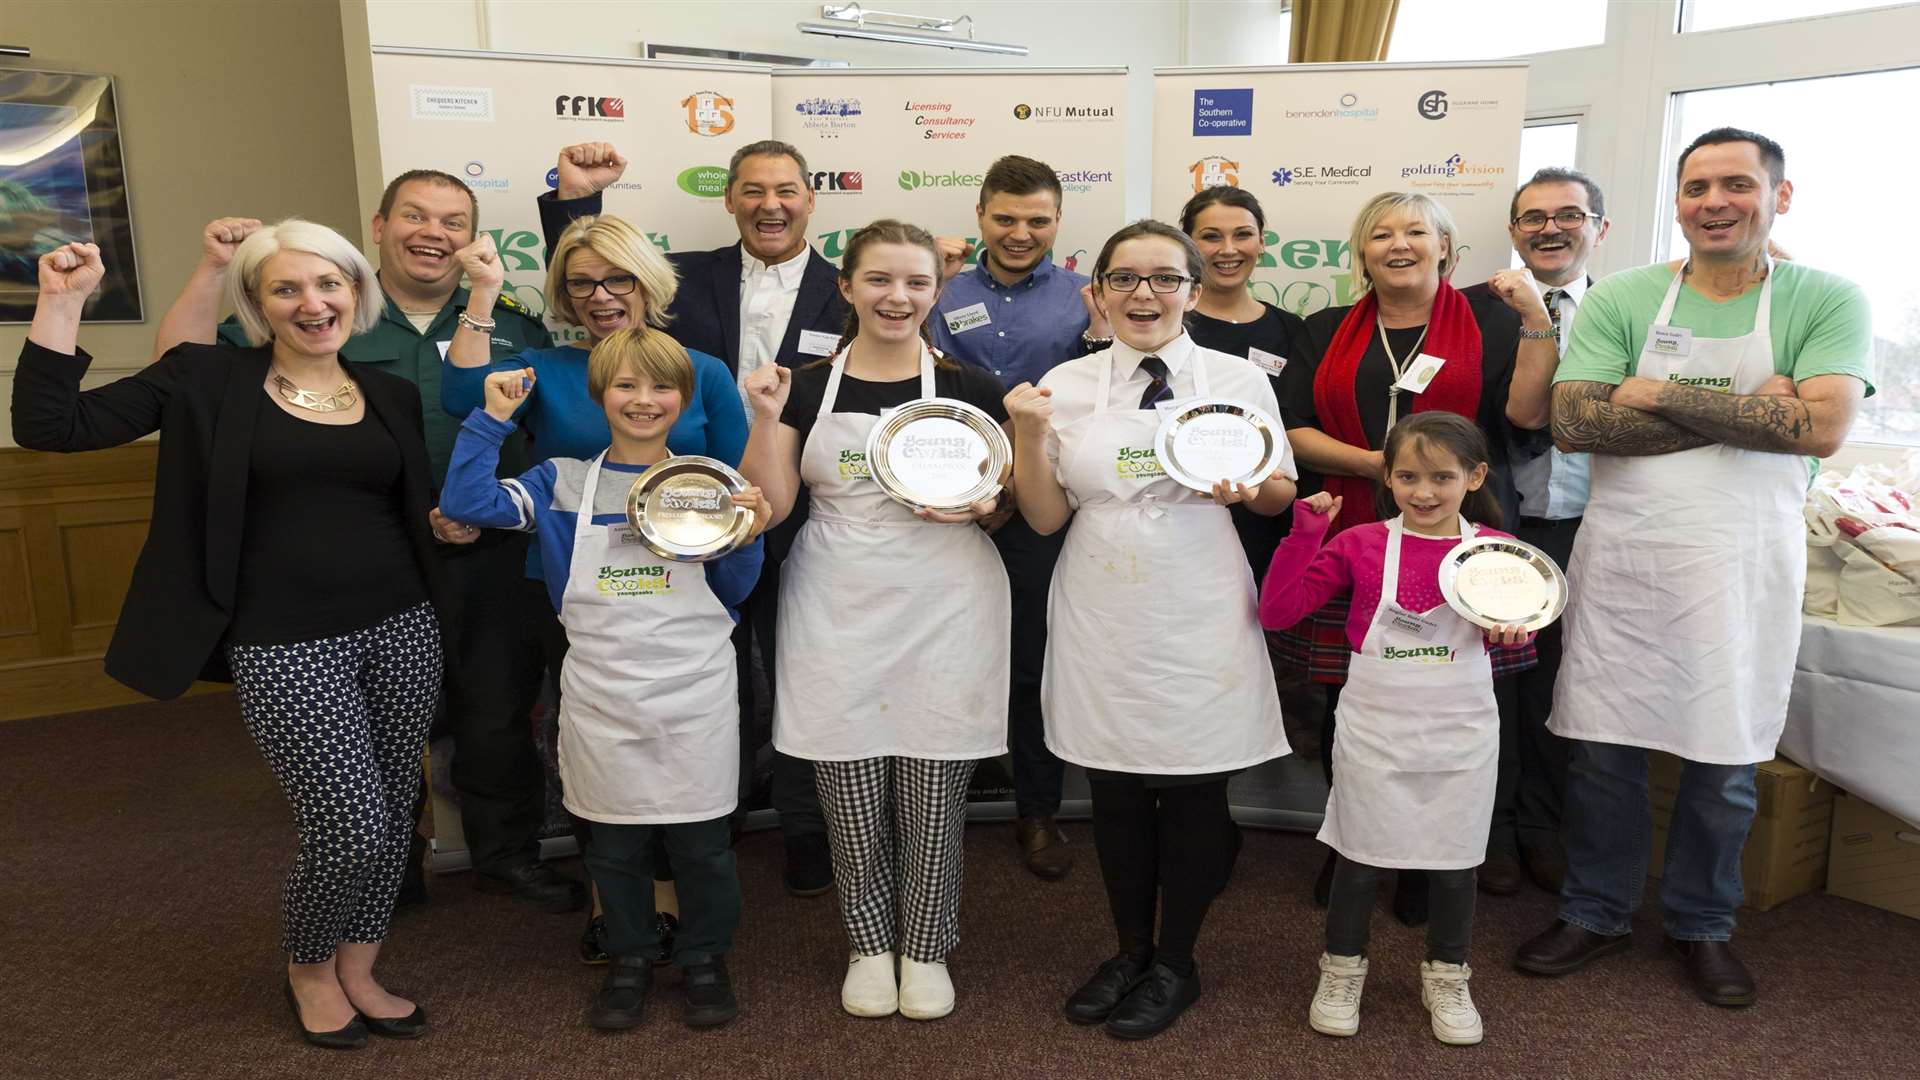 From left, Antonin Cocoran, Charlotte Fife, Morgan Kinch, and Boglar Bote Godri, winners of the Young Cooks 2018 contest at East Kent College, Thanet.